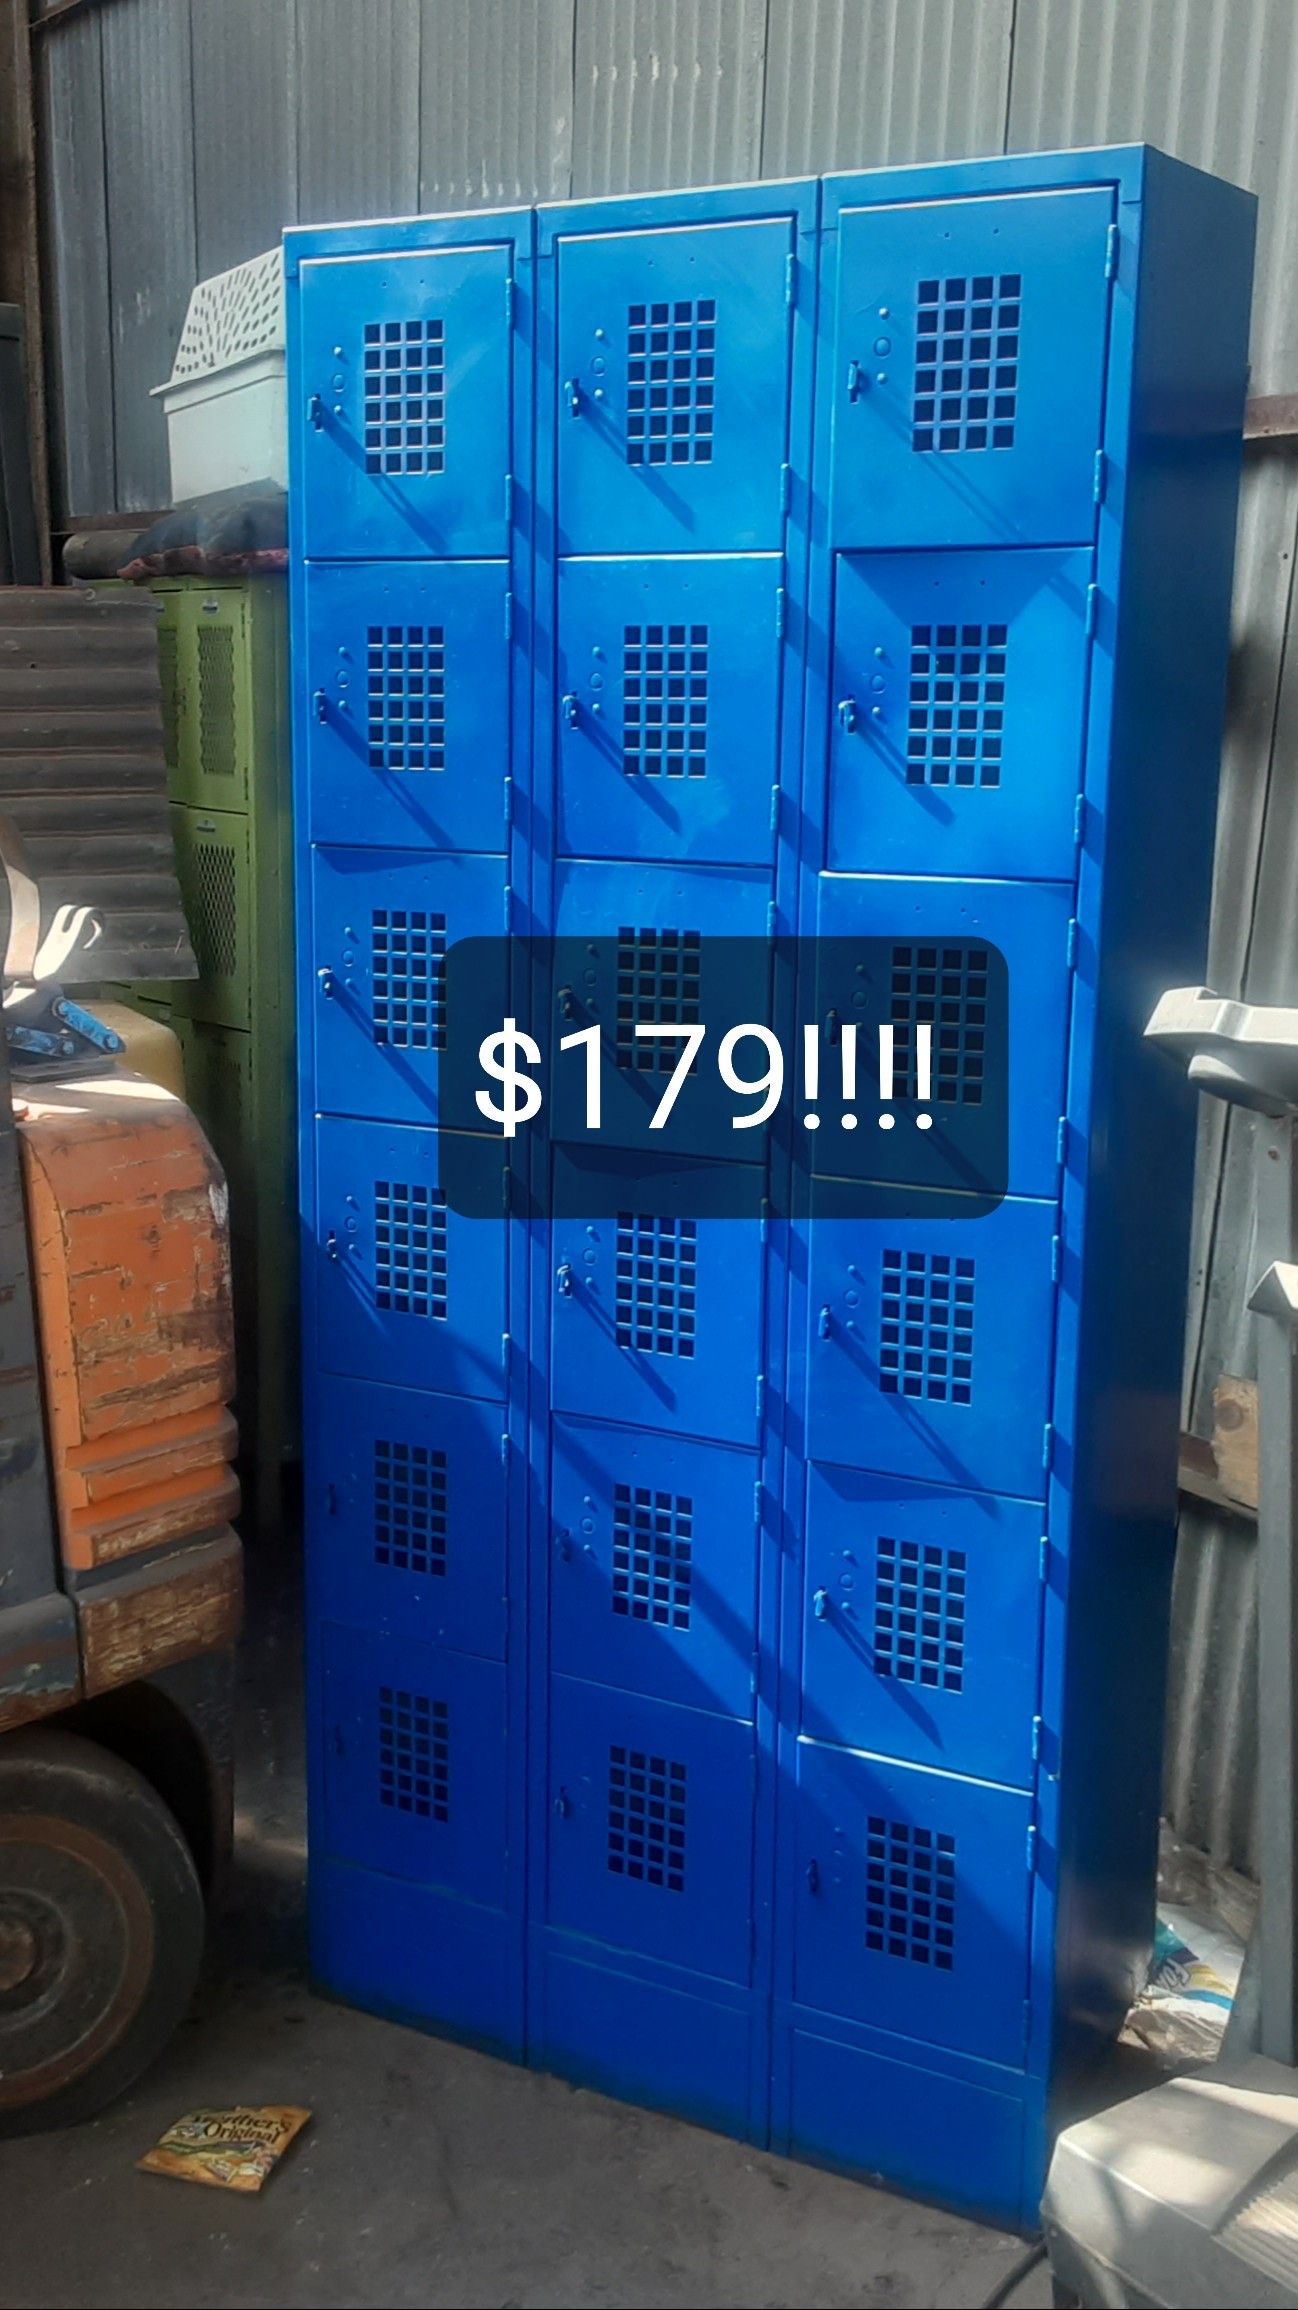 EMPLOYEE LOCKERS $179!!! "18" SECURITY SECTIONS $179!!! DODGER BLUE!!! WHOLESALE HURRY!!!...COMPANY PAID $450!!! HURRY